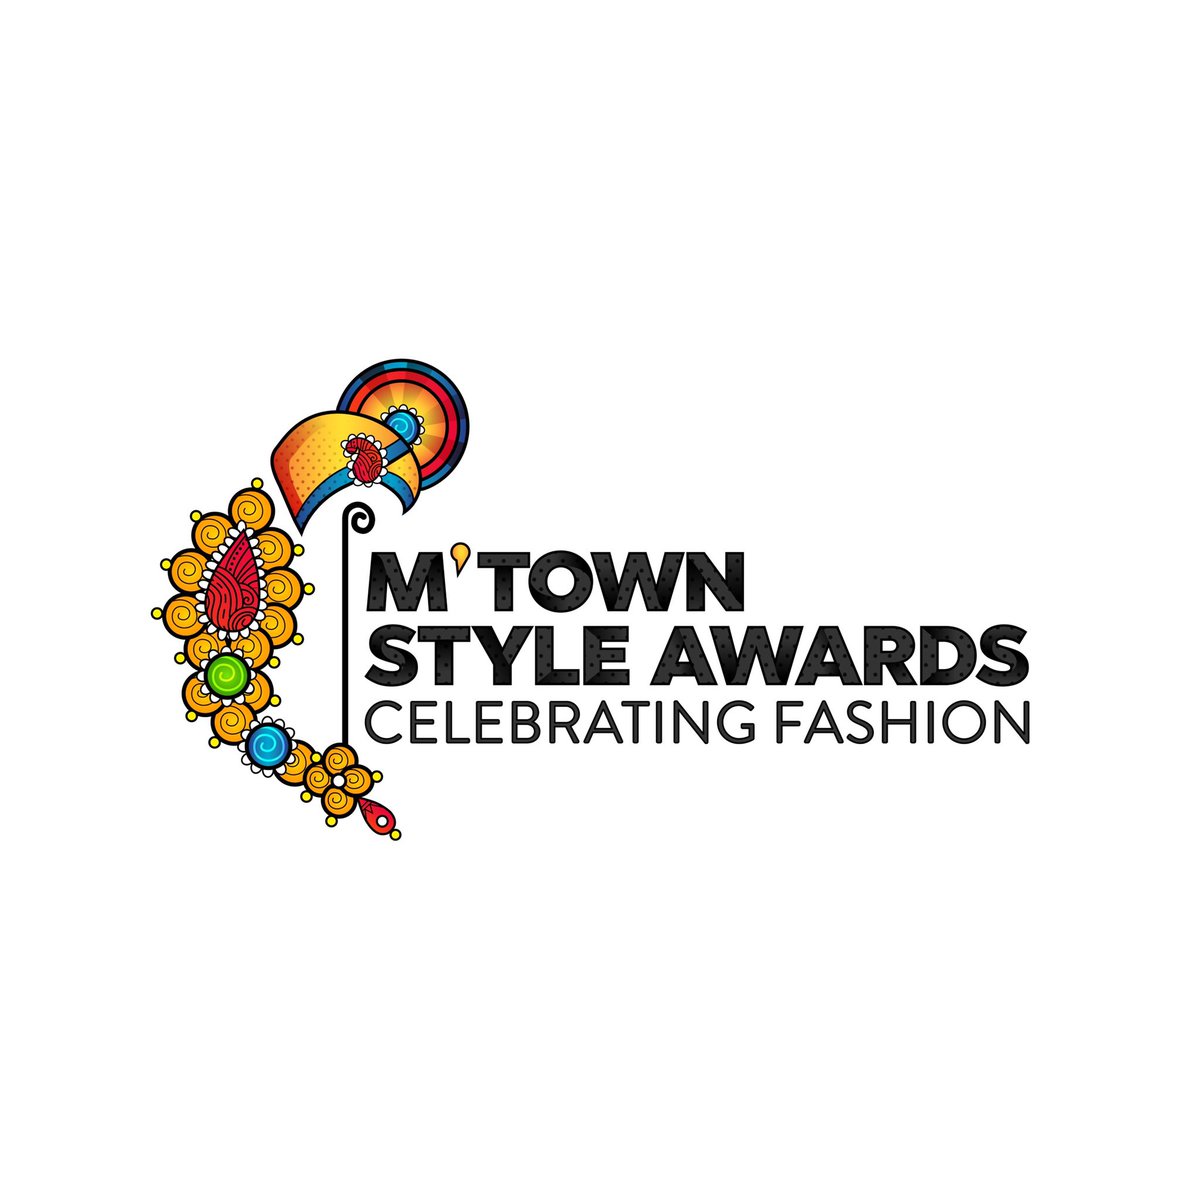 With great pleasure here’s presenting logo of #MtownStyleAwards, To felicitate personalities from #MarathiIndustry 
These awards is my dream and I am turning it into reality, So keep supporting 😊
More exciting news coming soon so follow on Insta/FB/Twitter @mtownawards